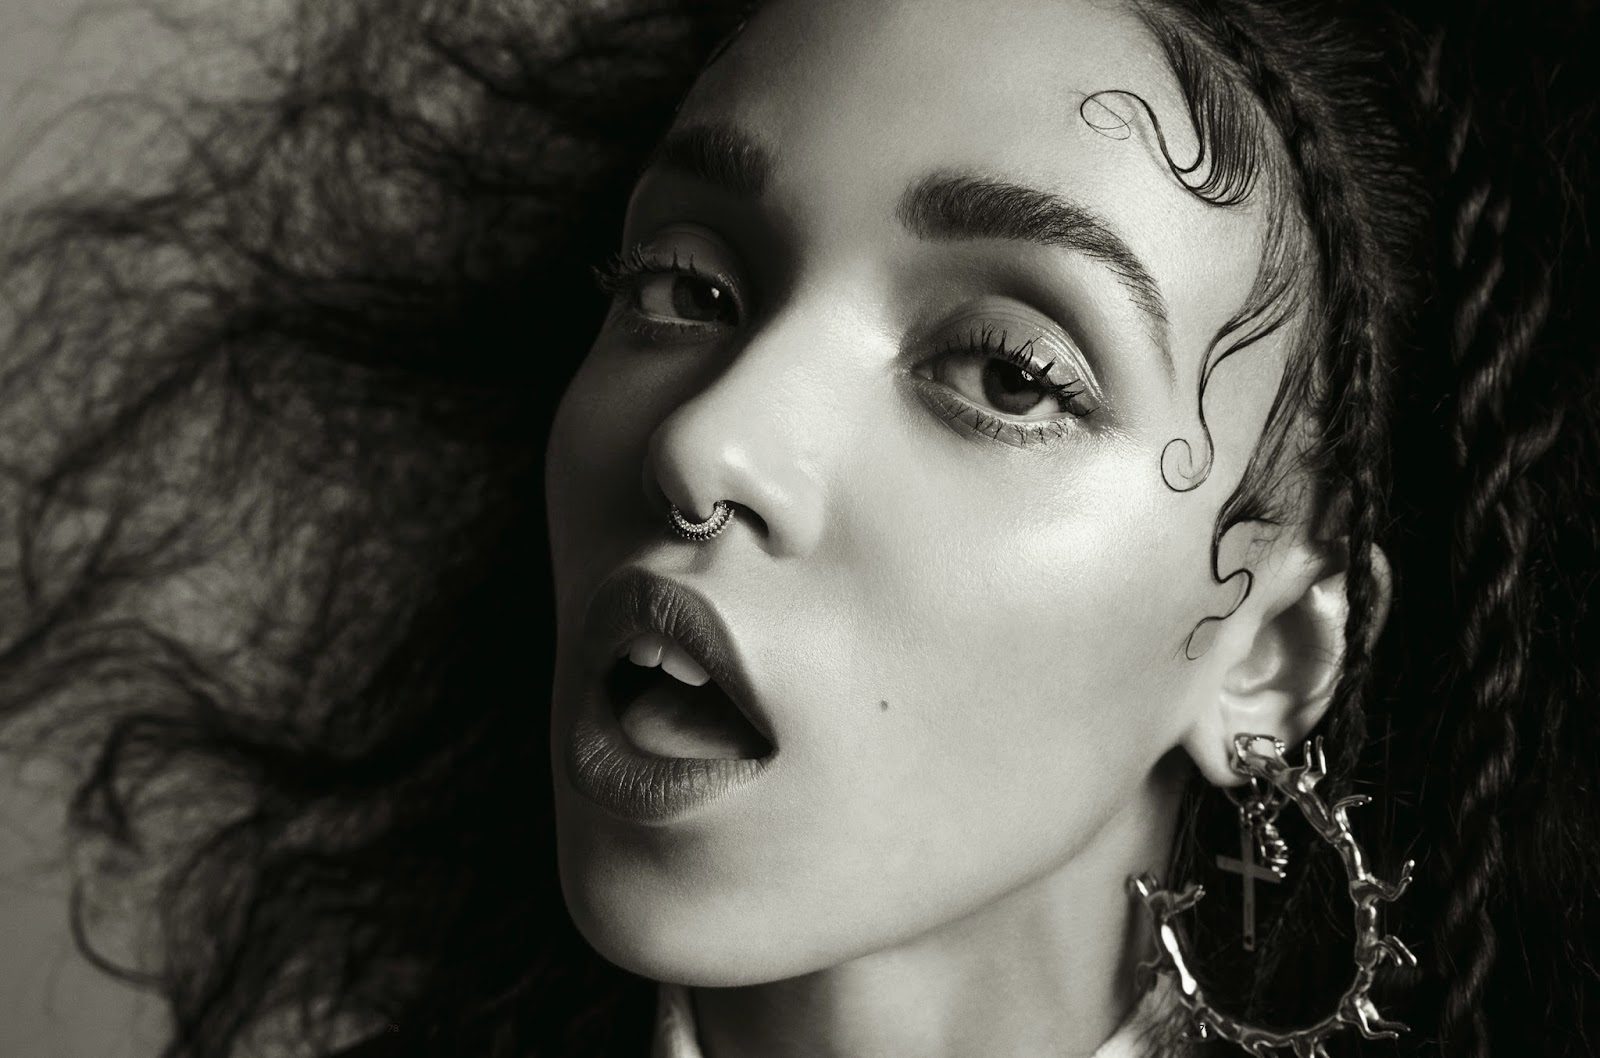 Lollapalooza Inspired Fashion: From FKA Twigs to A$AP Rocky